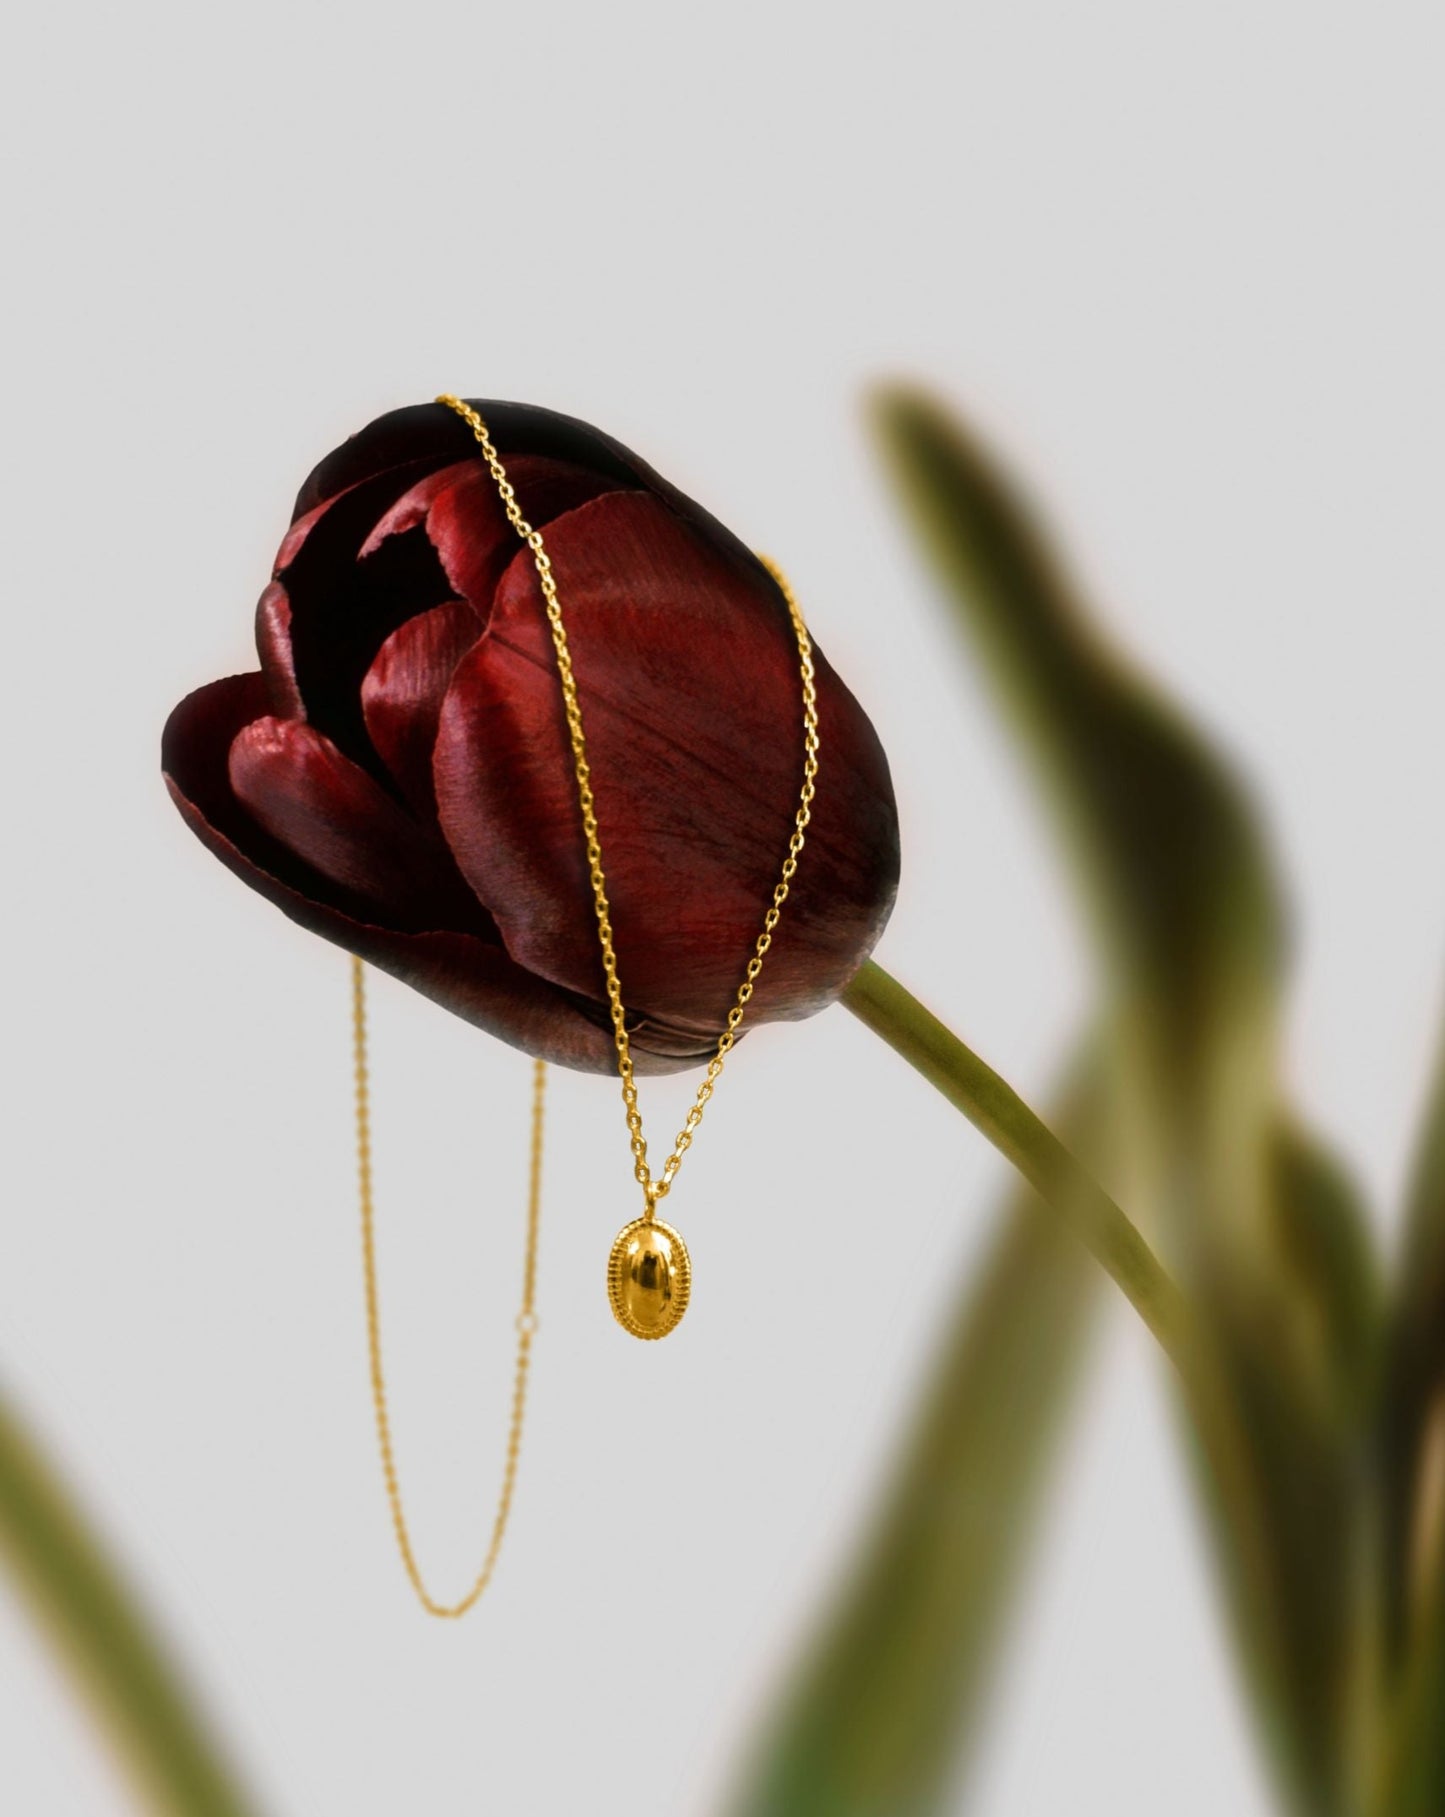 Oval Pendant Necklace in Gold